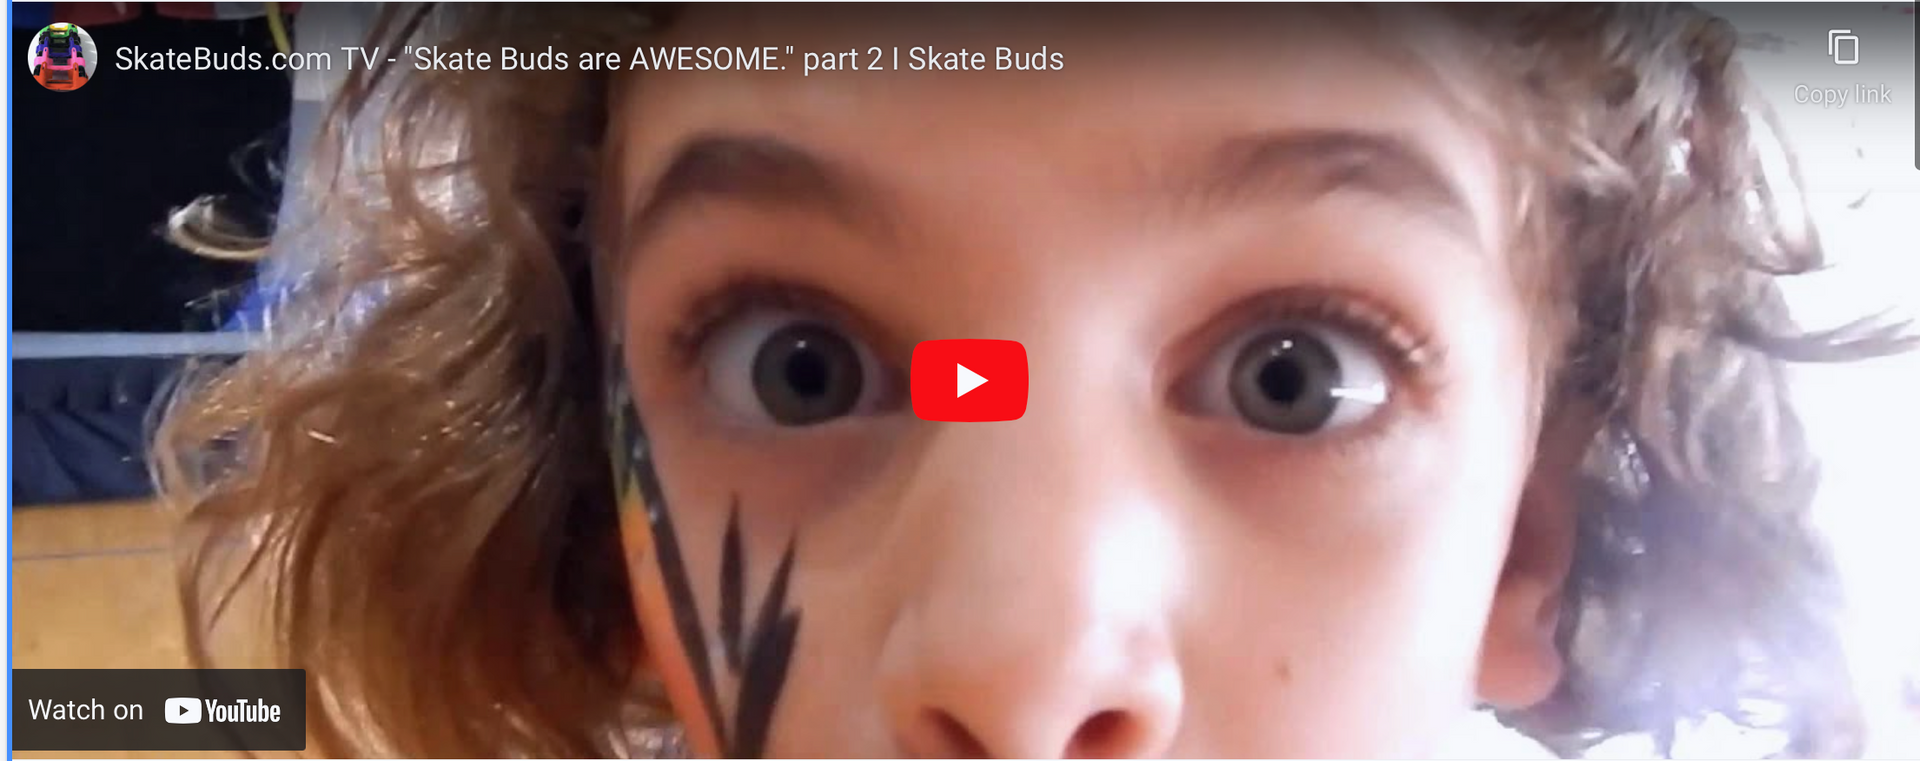 Load video: Skate Buds are fun and awesome.